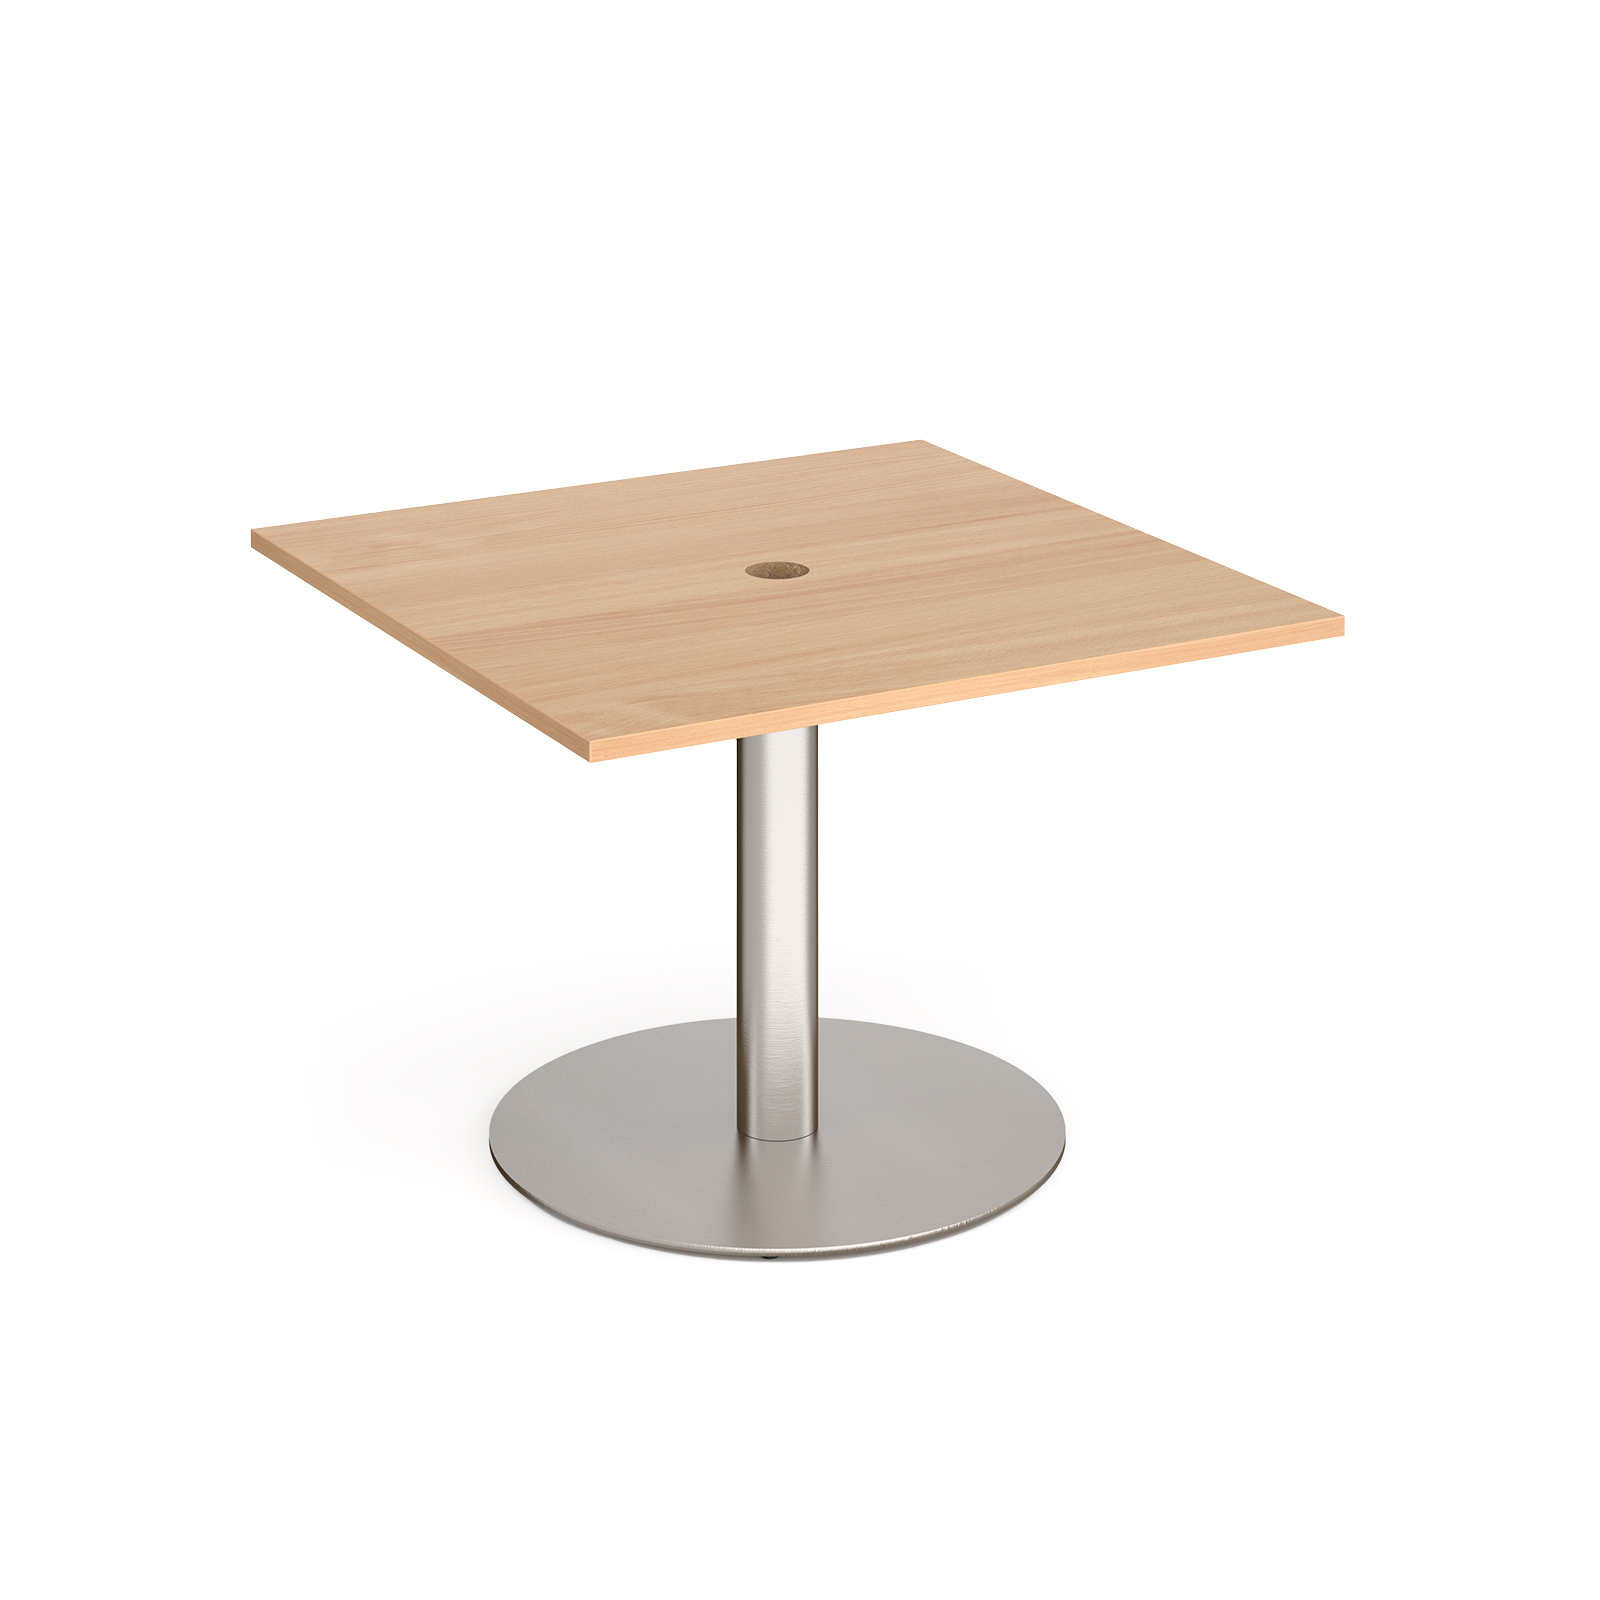 Eternal square meeting table 1000mm x 1000mm with central circular cutout 80mm - brushed steel base, beech top